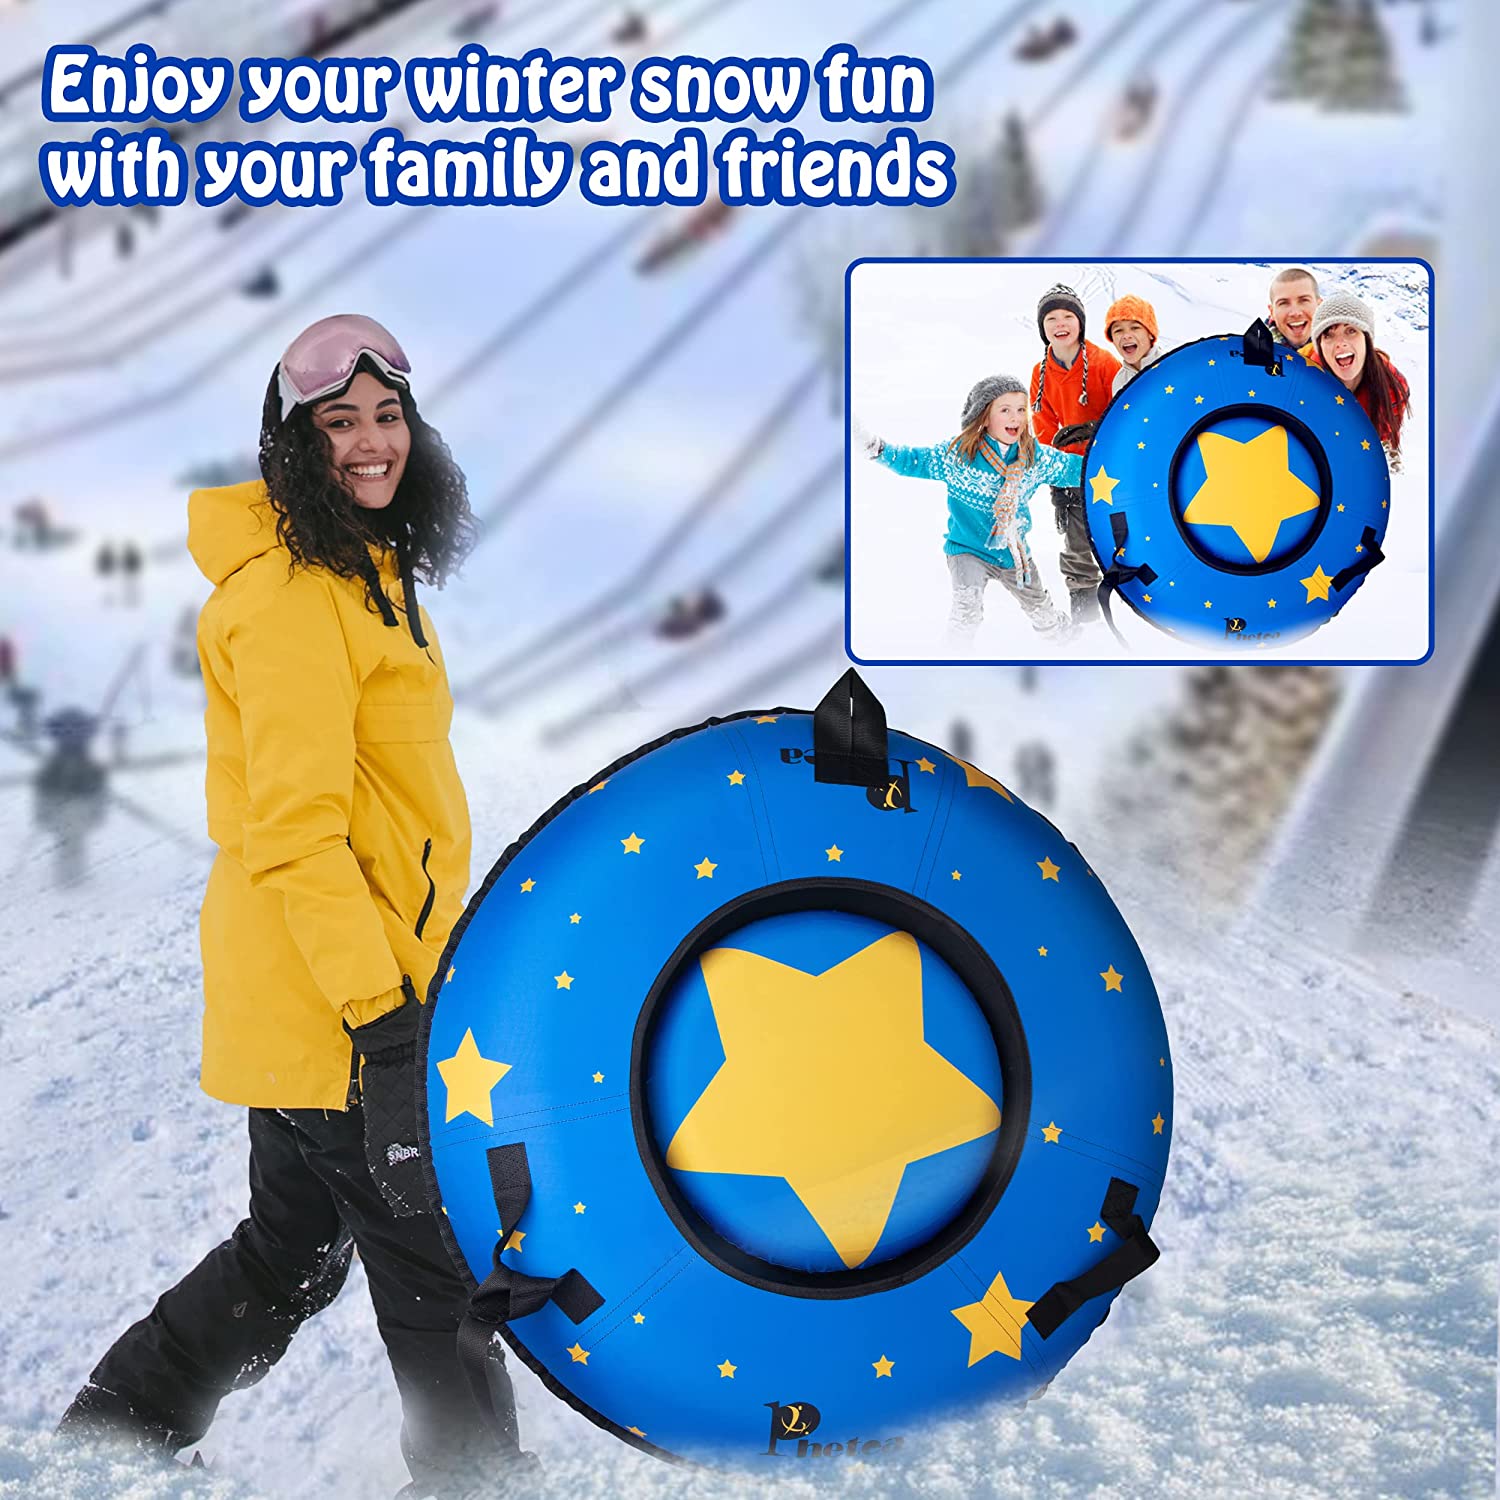 PHETEA Foldable Inflatable Snow Tubes for Sledding Heavy Duty,Towable Snow Sled for Kids and Adults.42 inch,Blue 